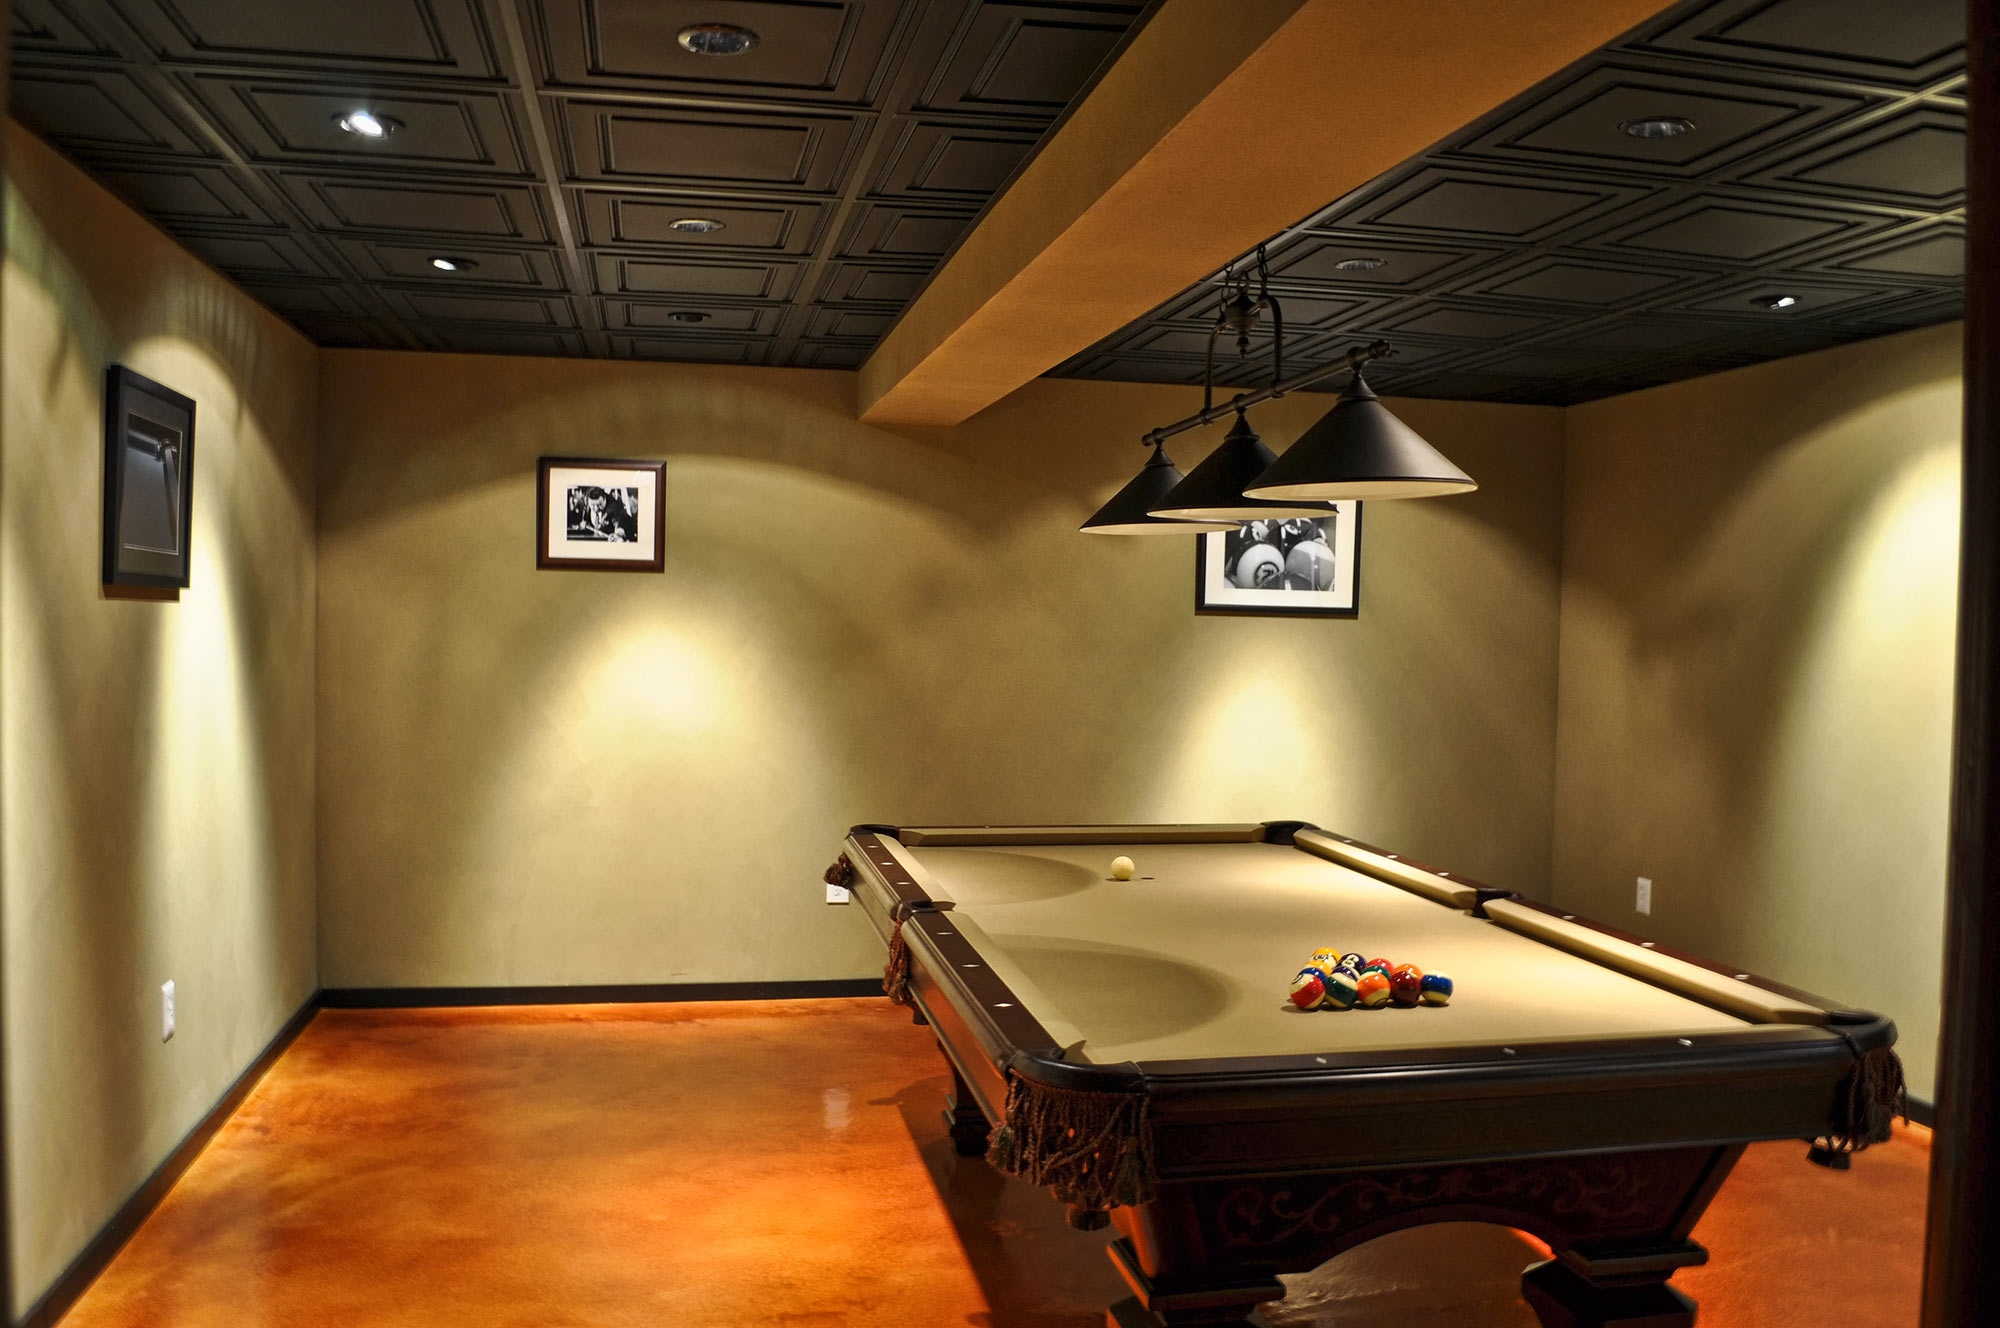 Pool Table Light Drop Ceiling